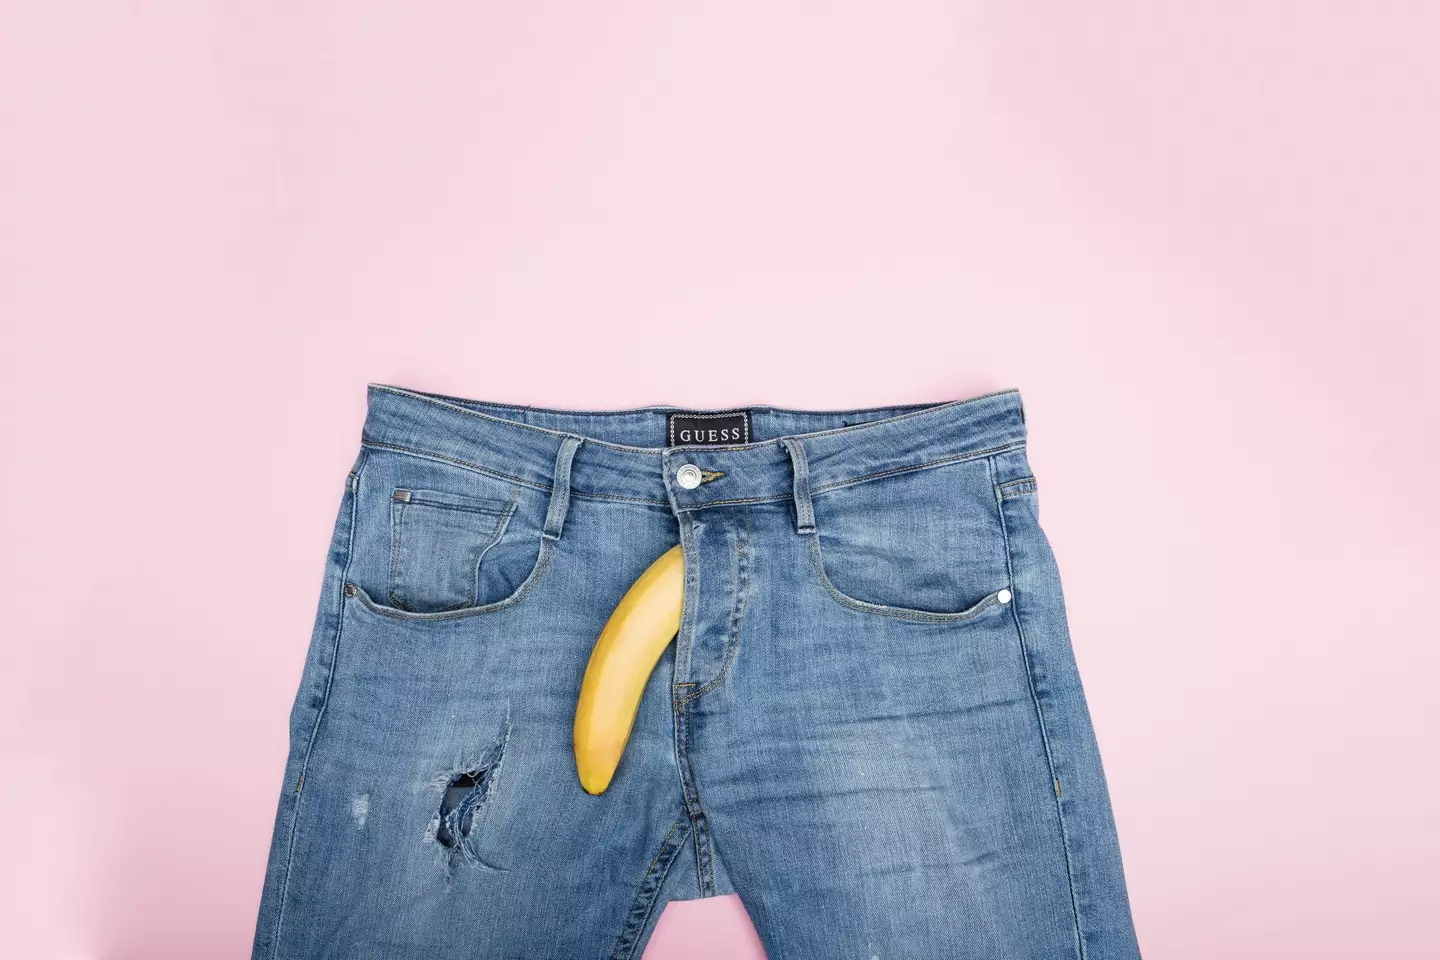 The banana is meant to represent a penis here, in case that wasn't clear.